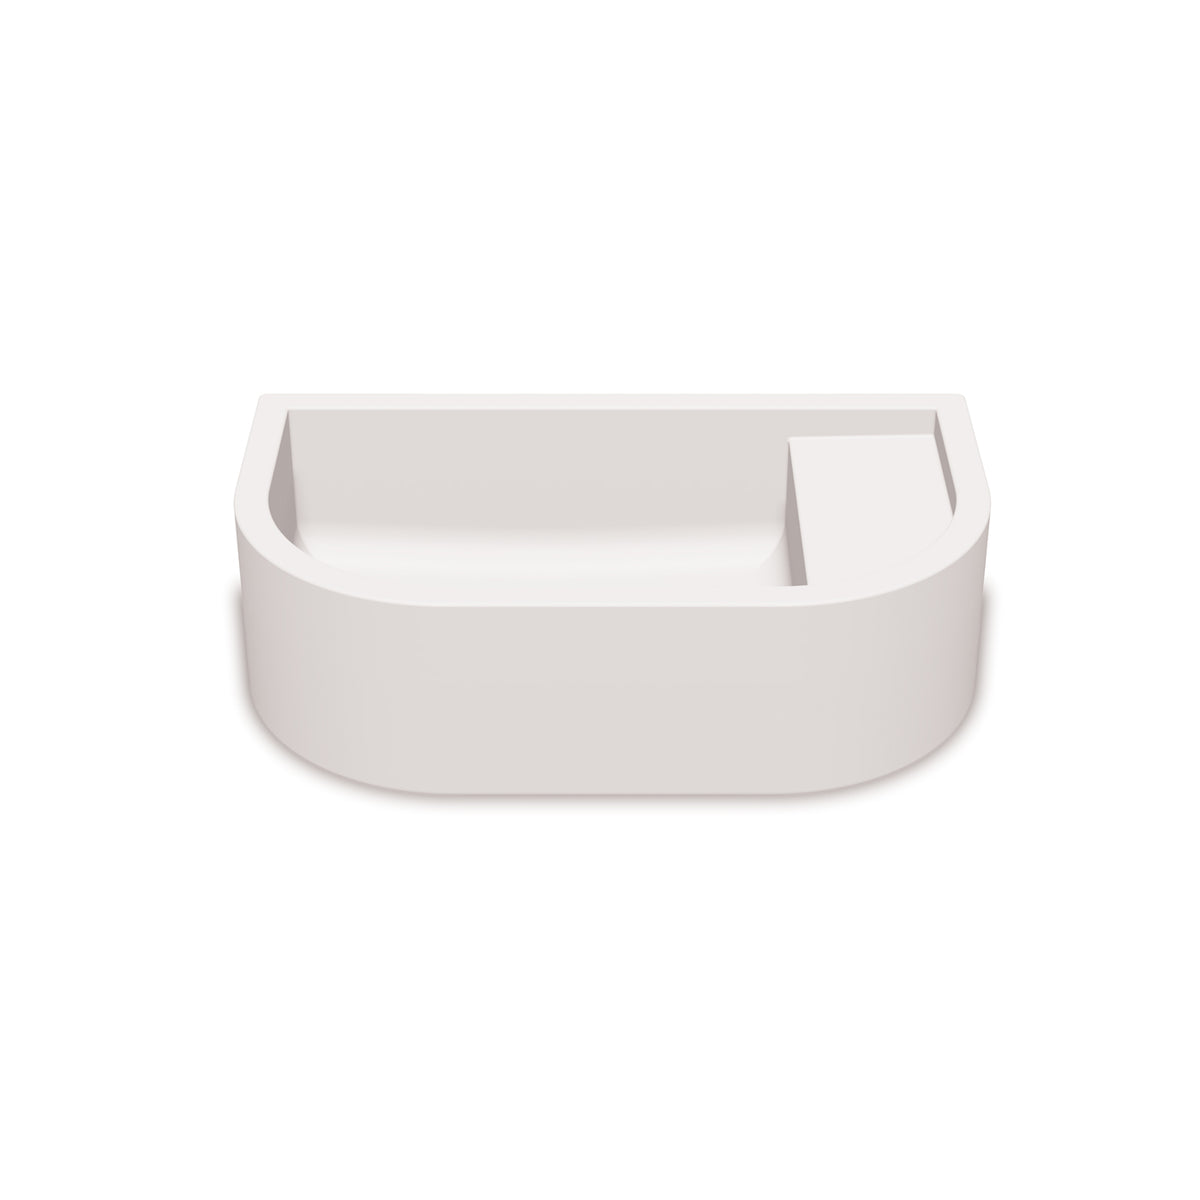 Loop 01 Basin - Overflow - Surface Mount (Ivory,No Tap Hole,Chrome)